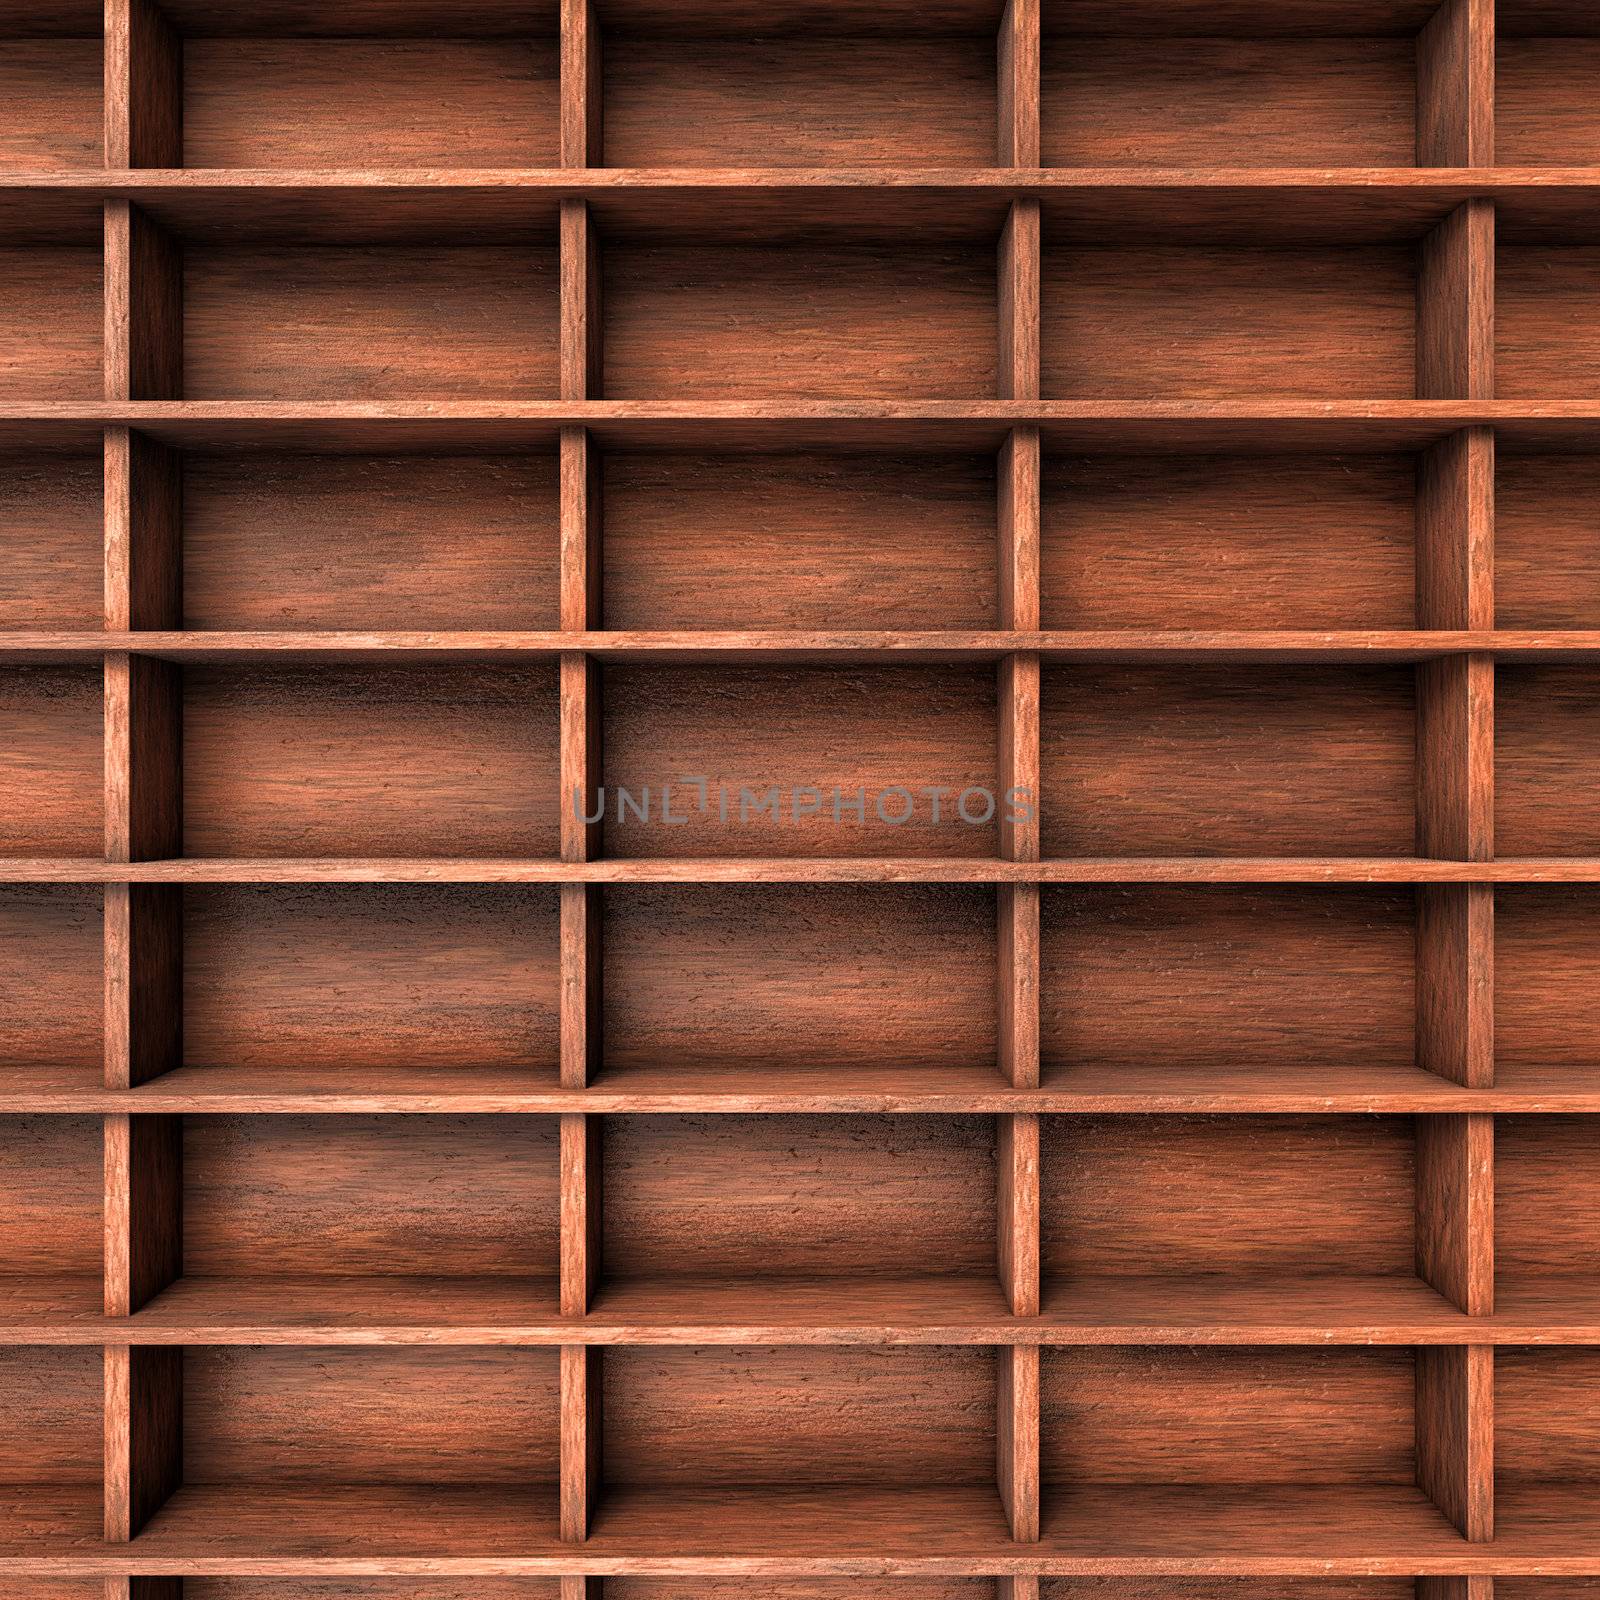 Several brown wood shelves with slots